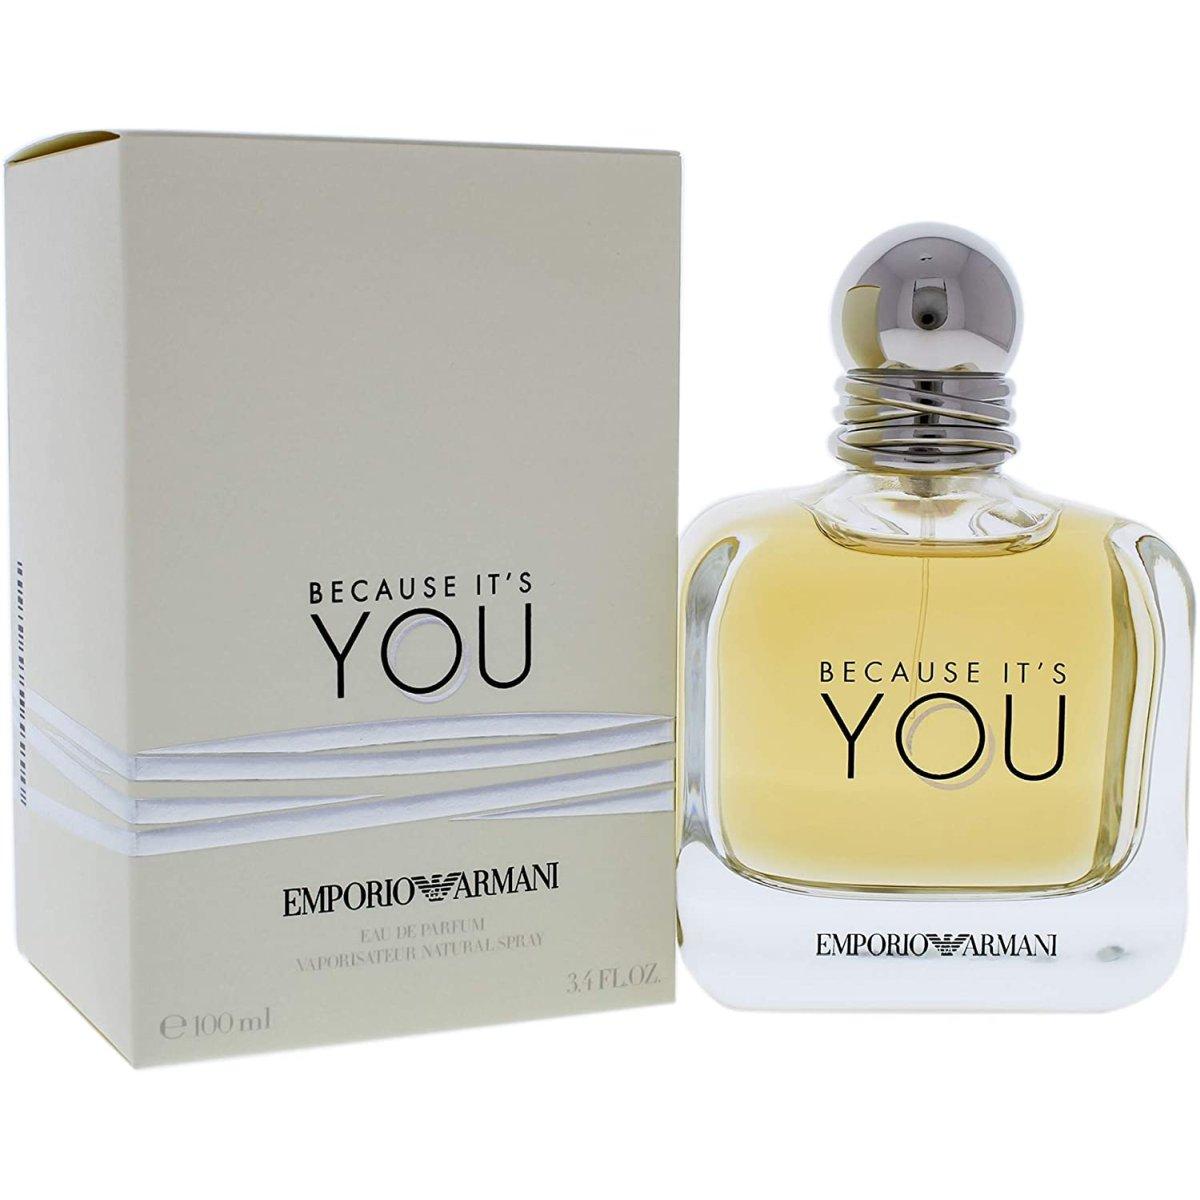 Because it's you 100 ml